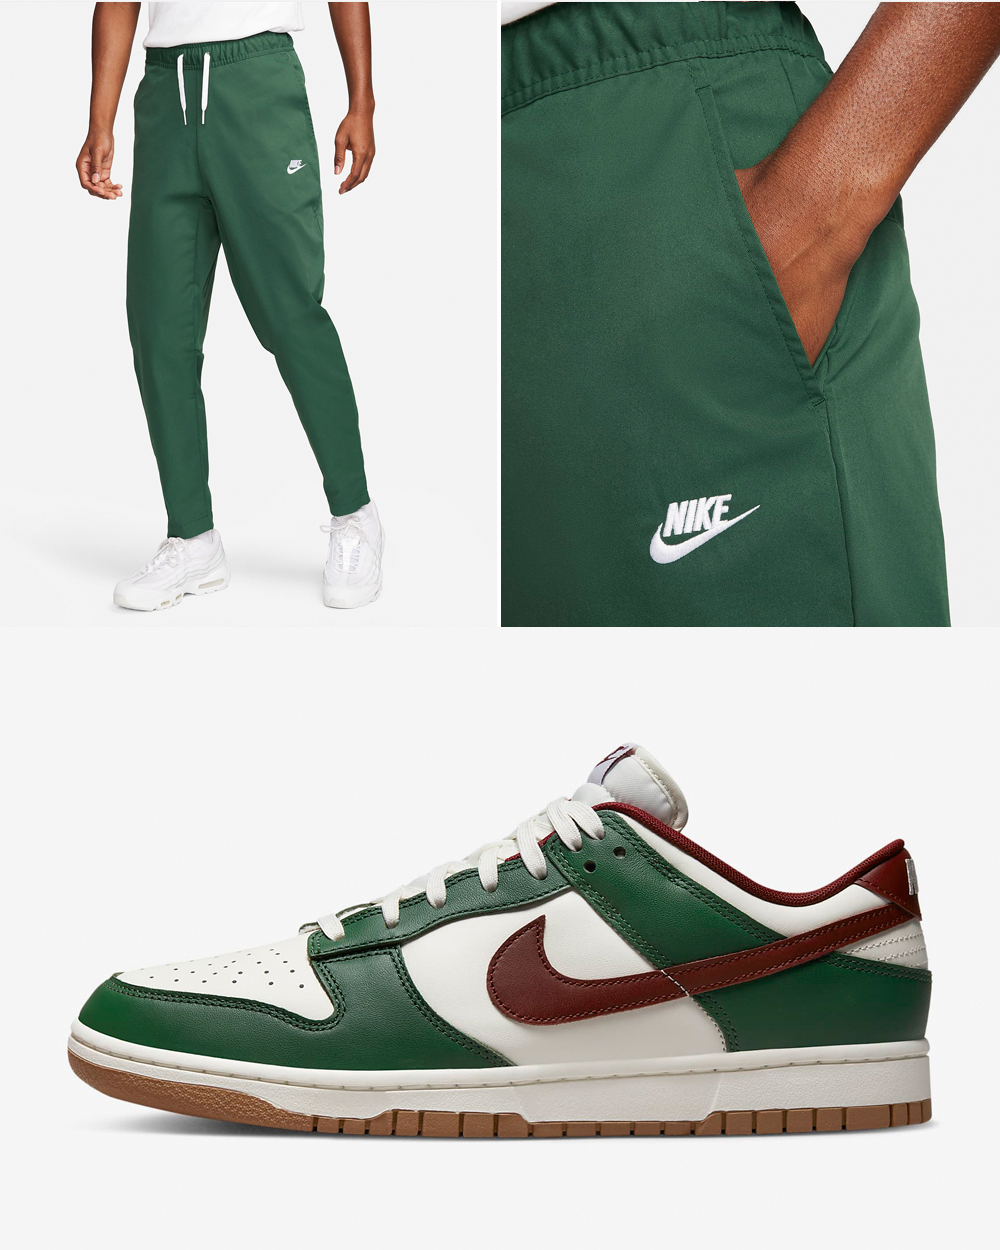 Nike-Dunk-Low-Gorge-Green-Pants-Outfit